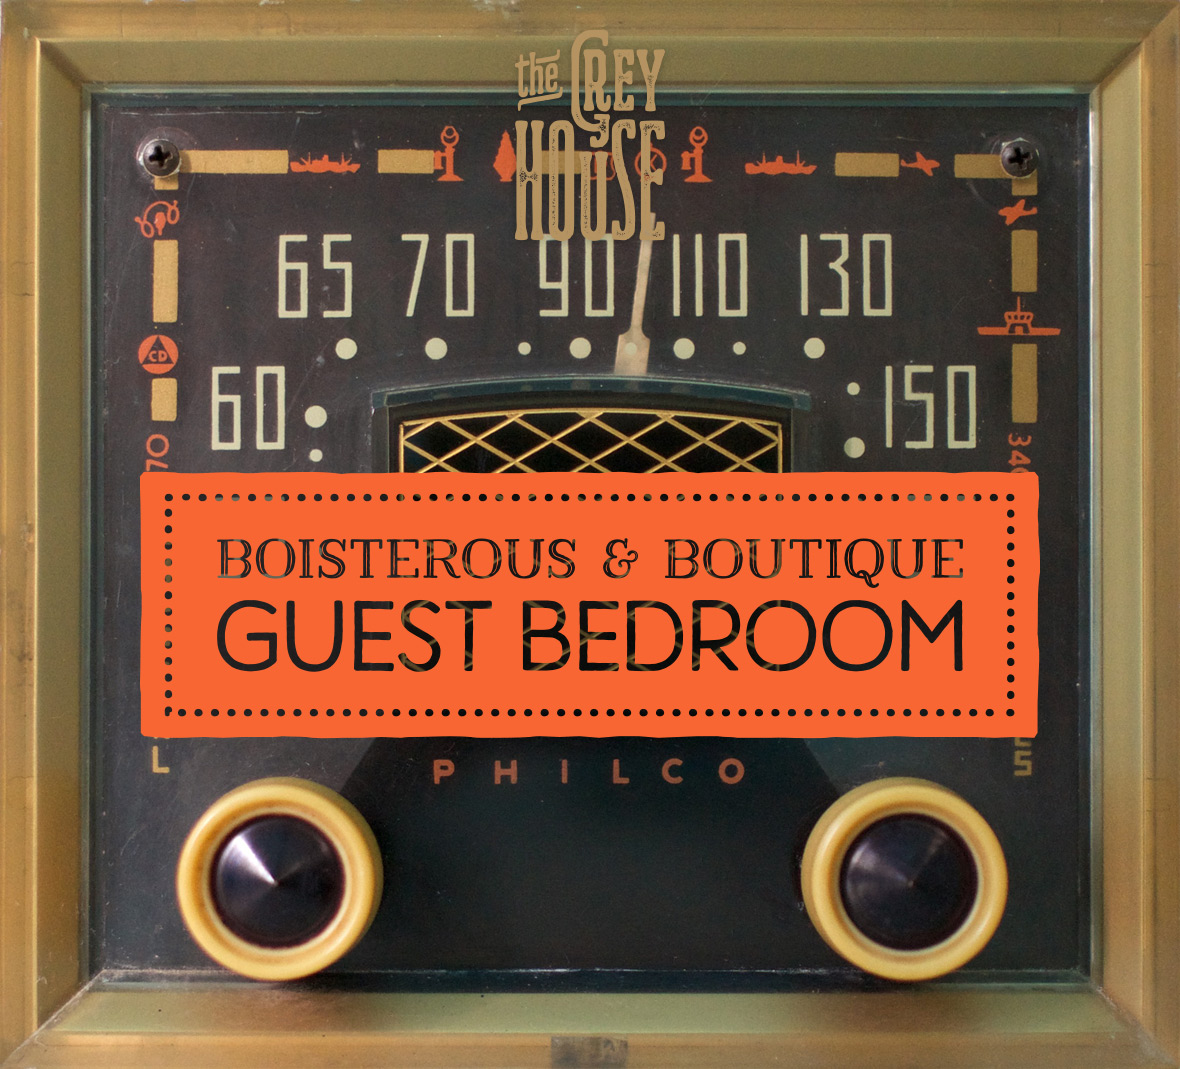 A vintage radio keeps guests entertained.